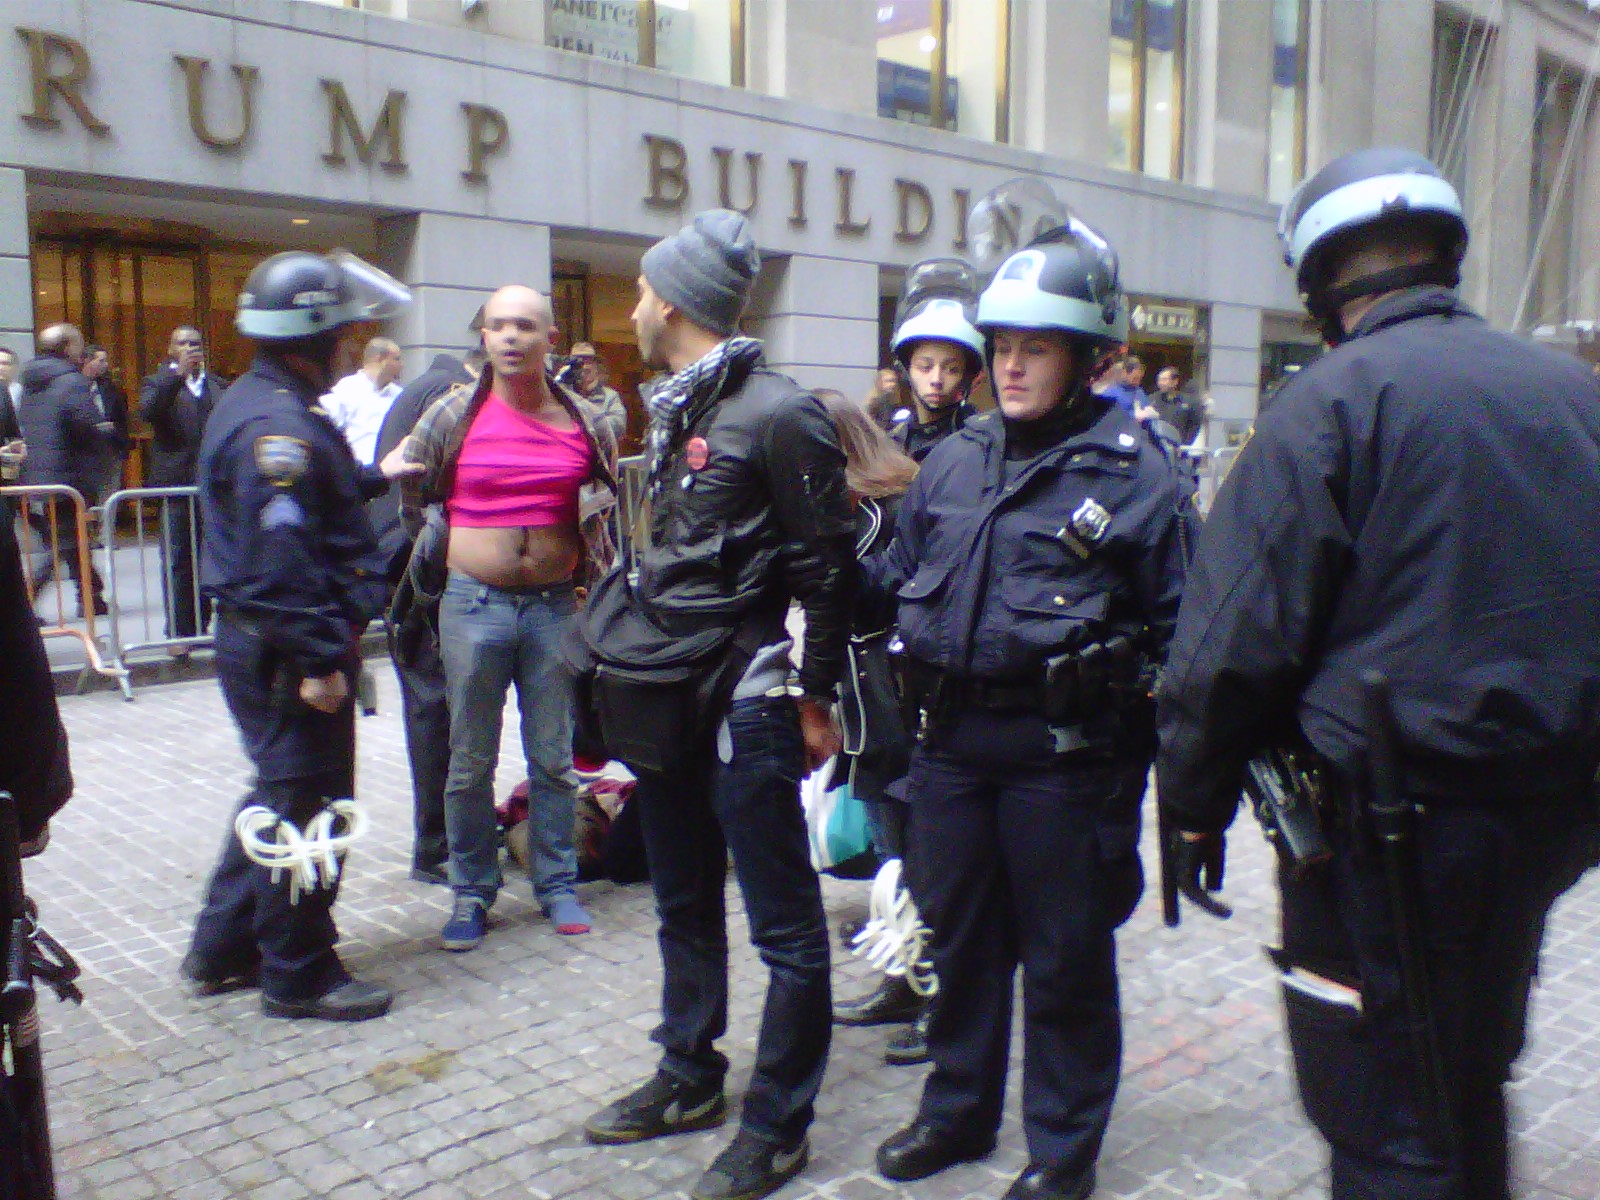 'Day of Action' Occupy Wall Street Arrests 